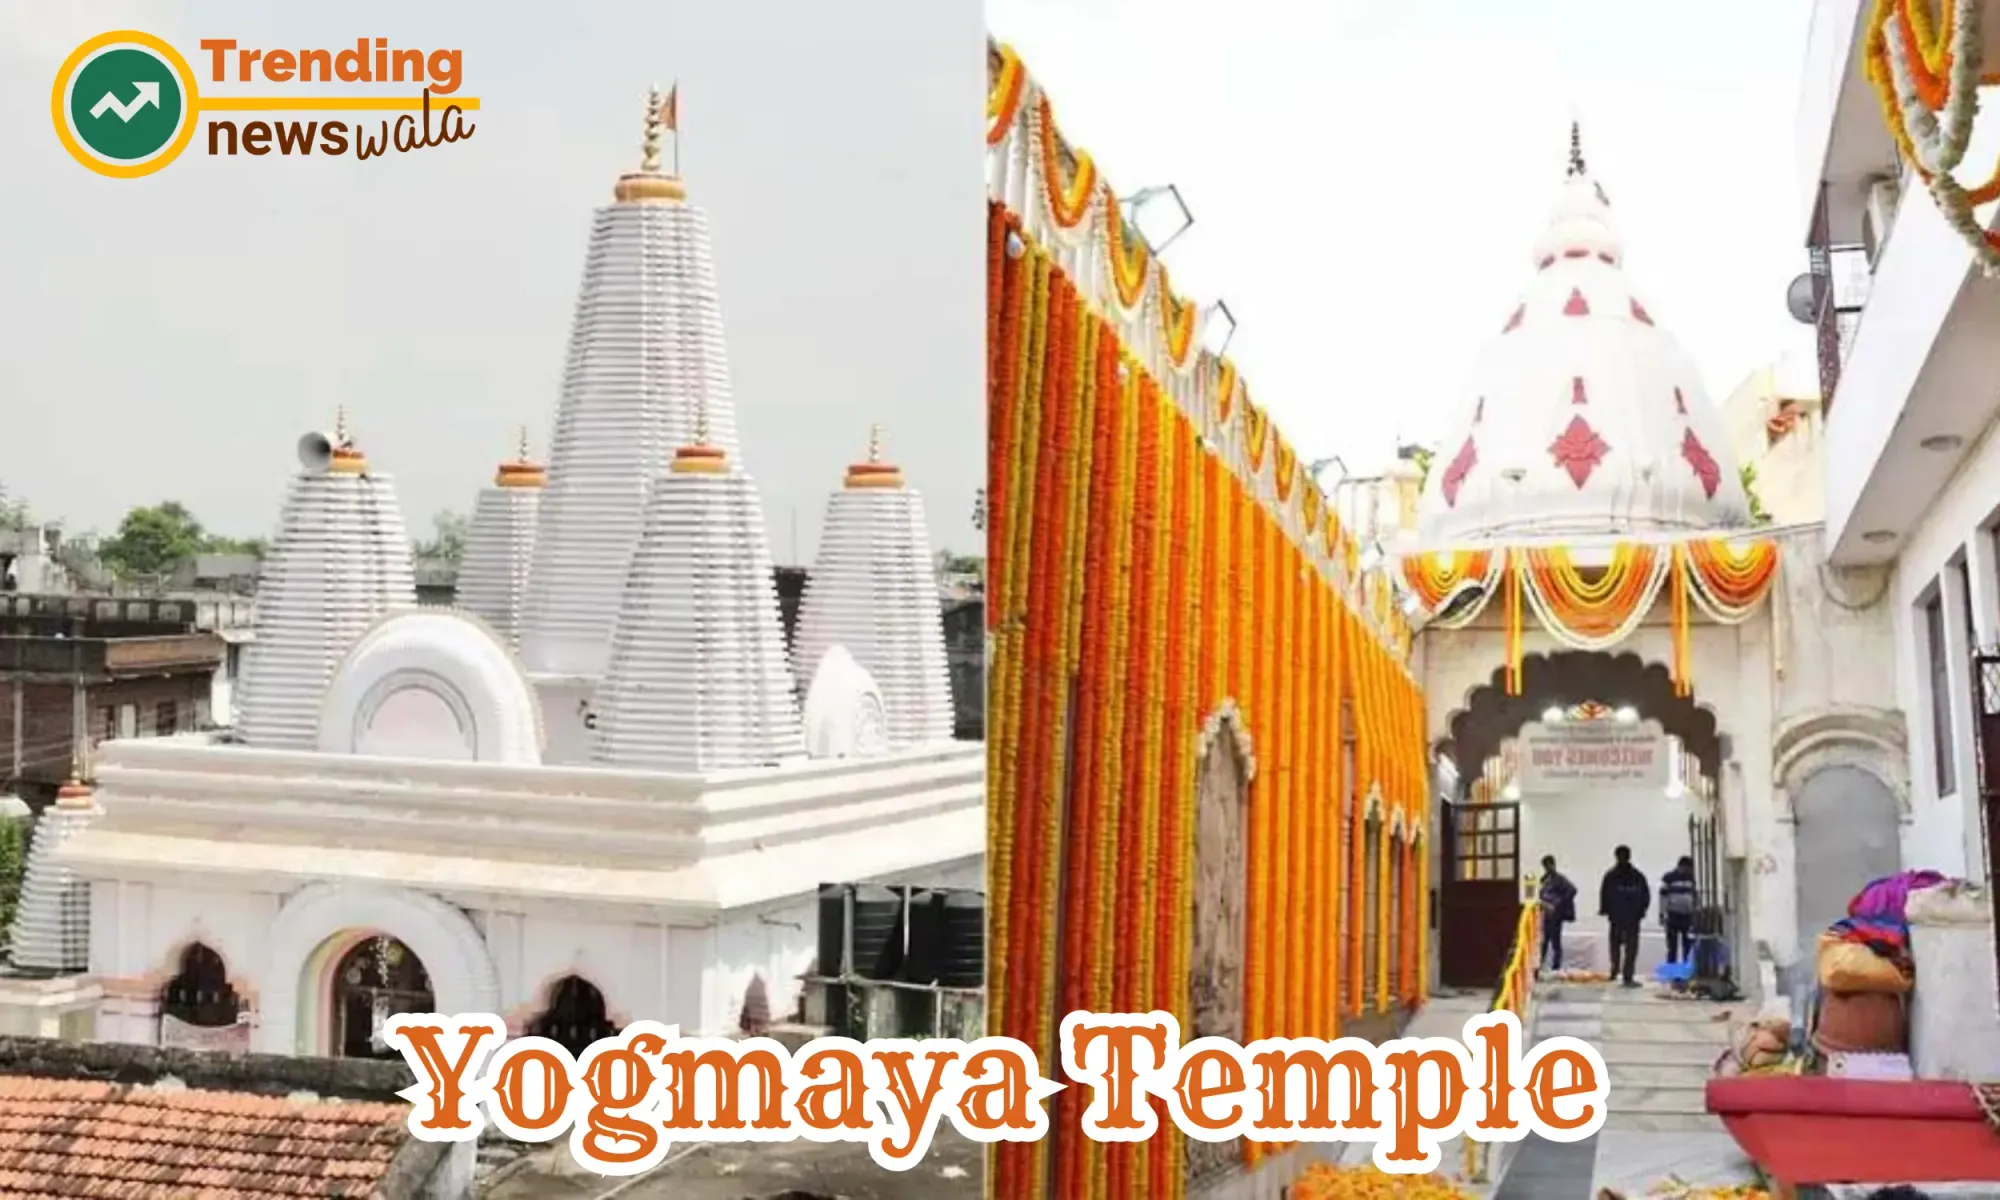 The Yogmaya Temple, also known as the Jogmaya temple, is an ancient Hindu temple located in Mehrauli, New Delhi.